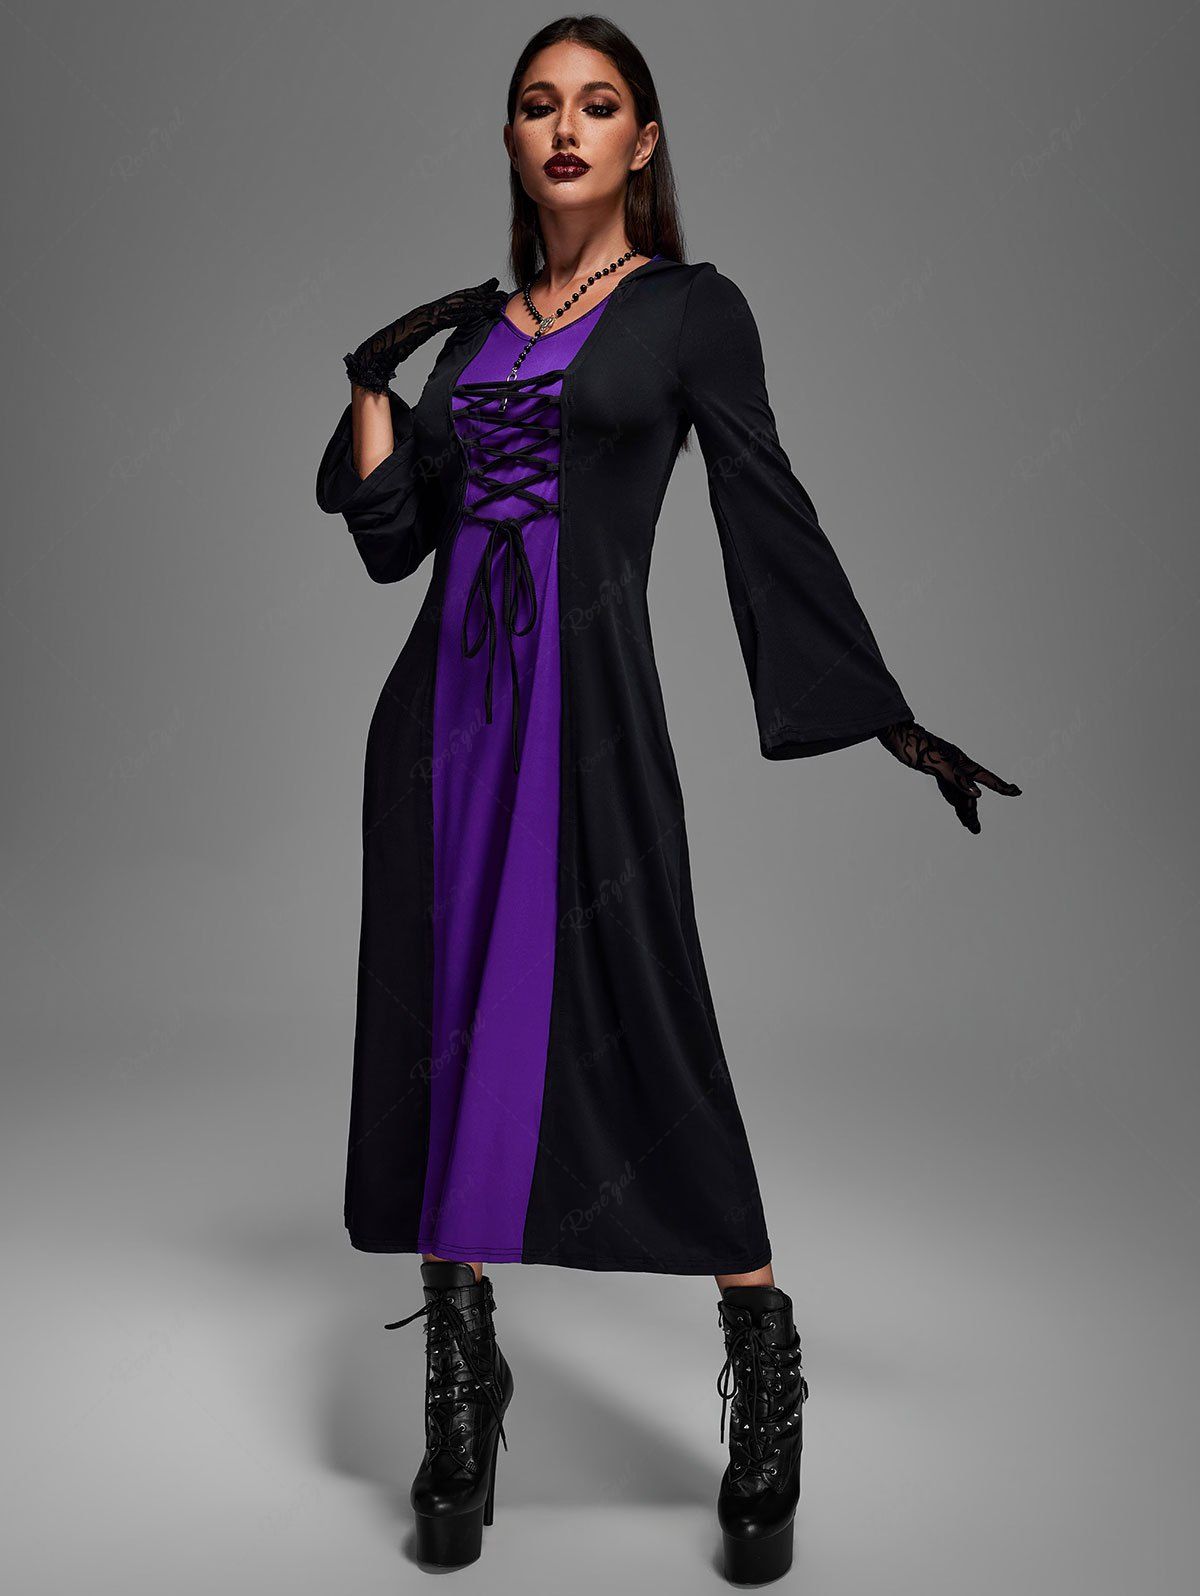 Gothic Medieval Renaissance Lace Up Two Tone Plus Size Hooded Dress